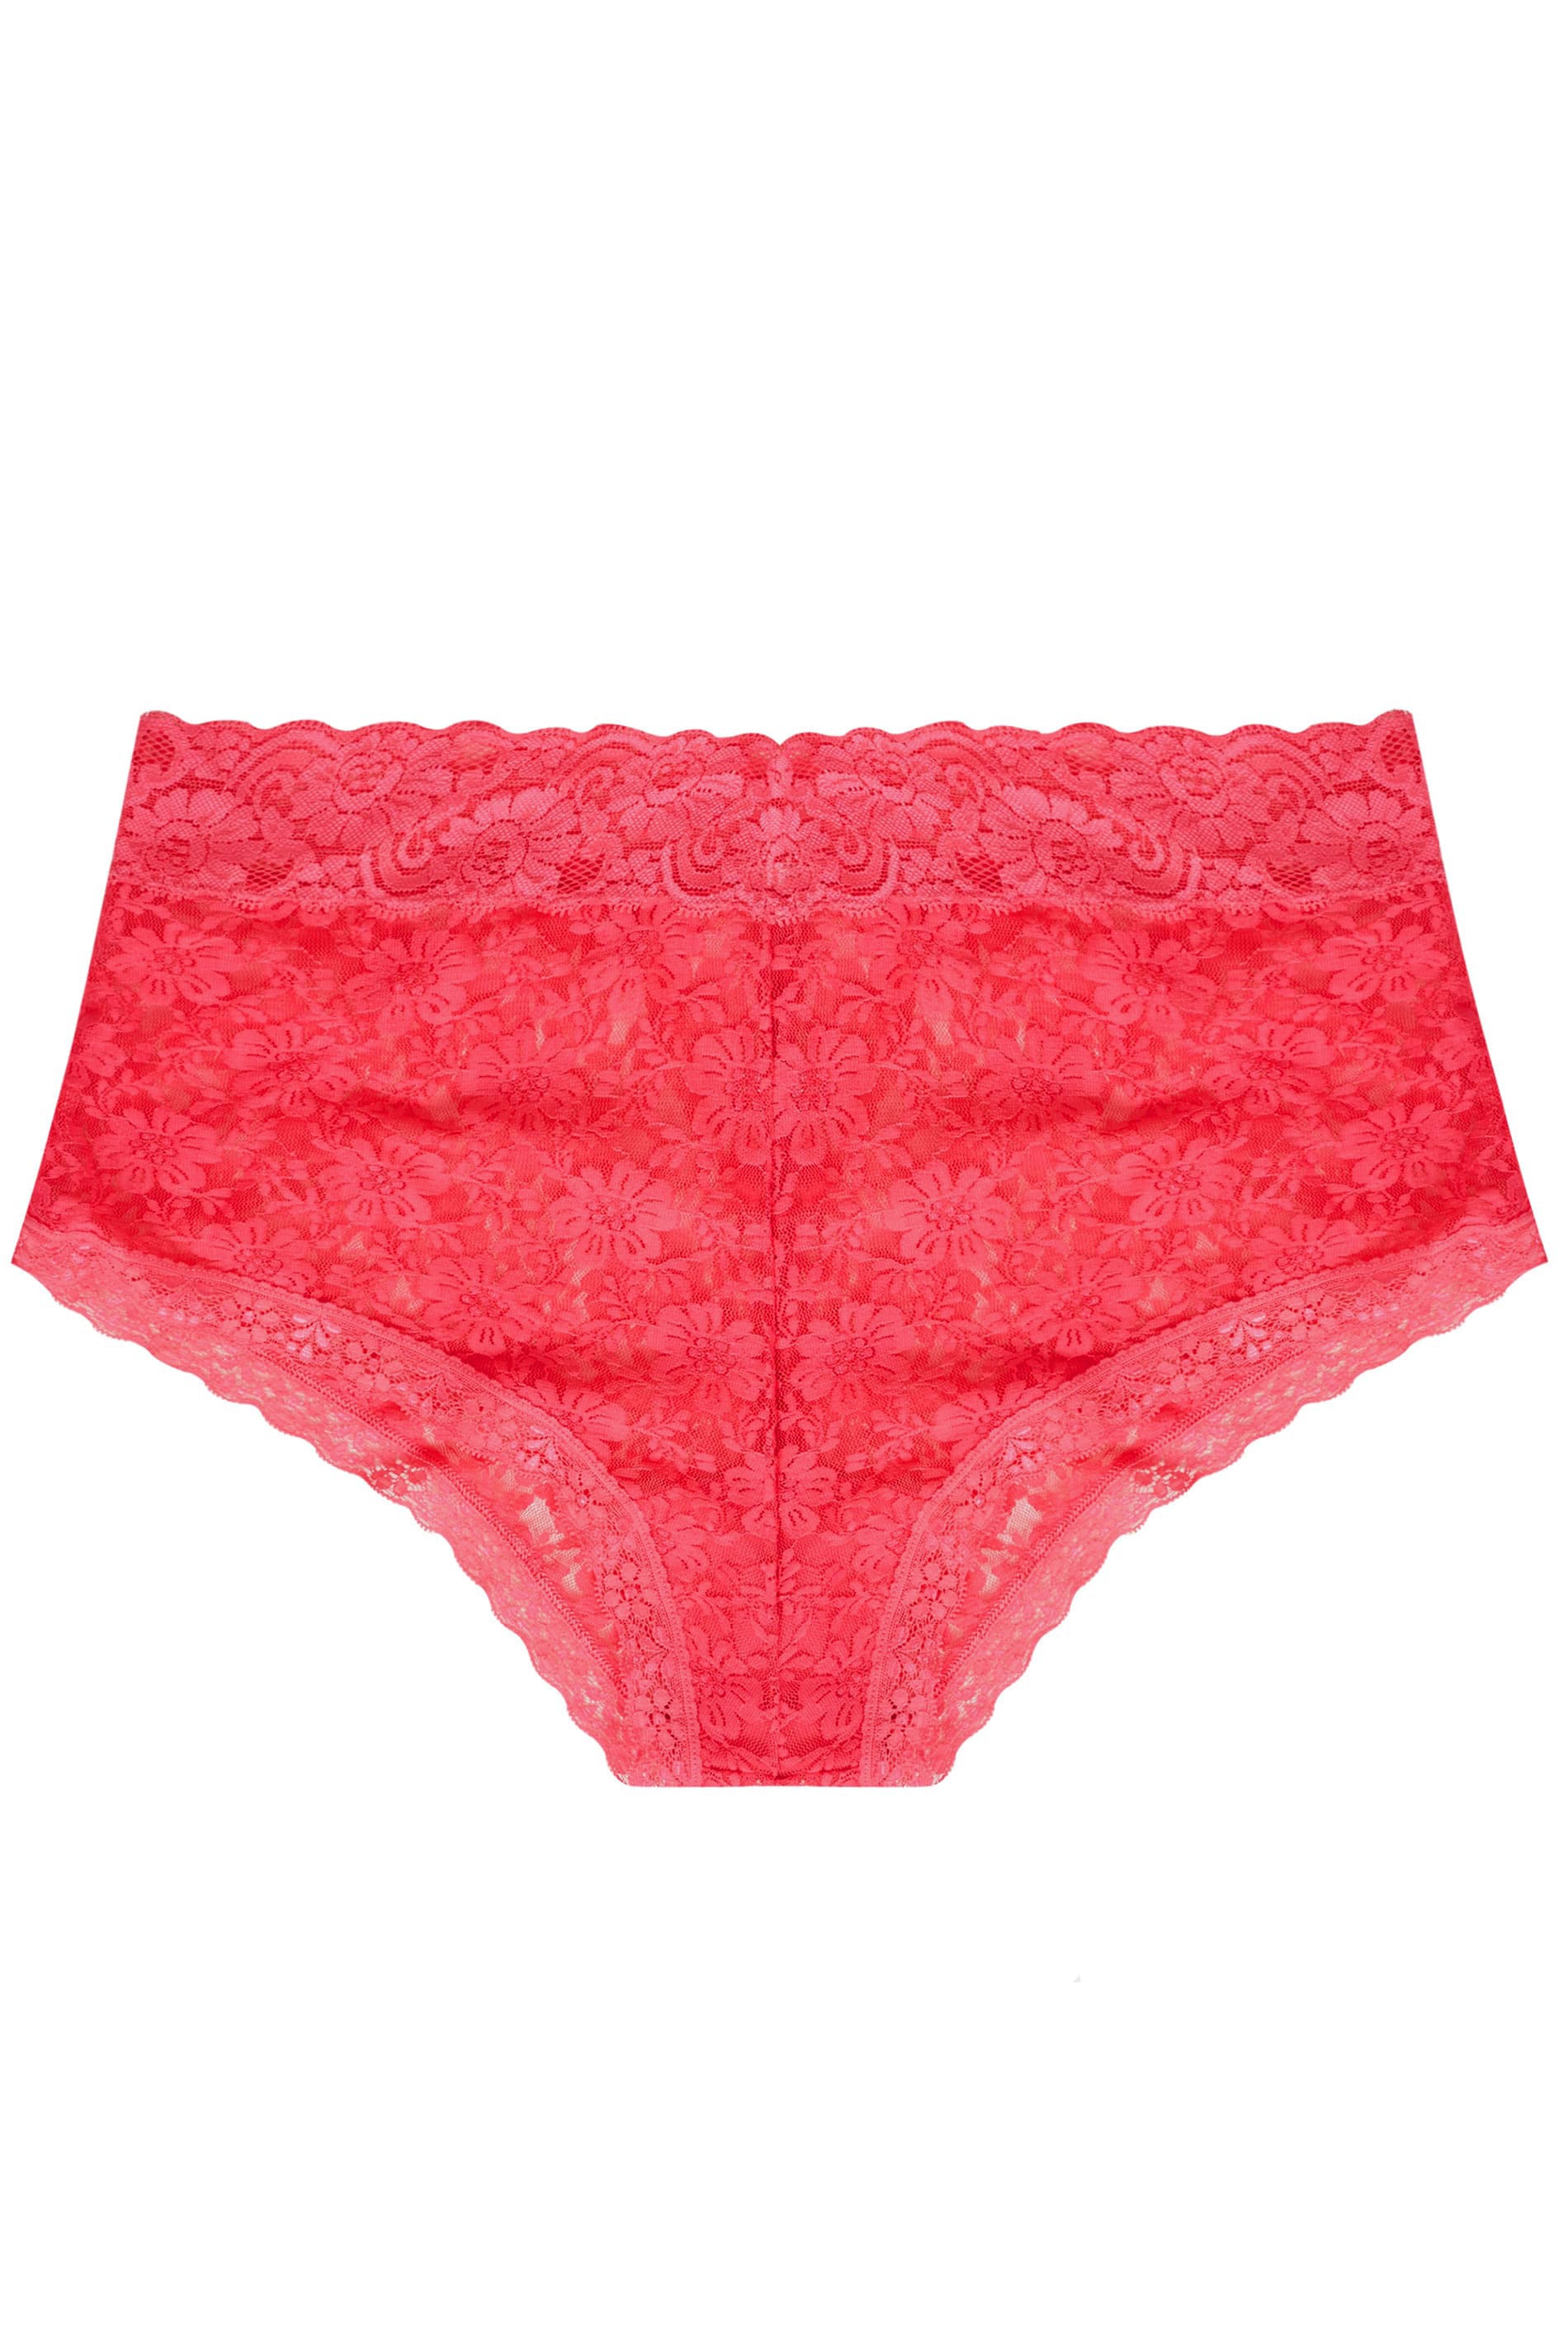 Coral Lace Briefs | Yours Clothing